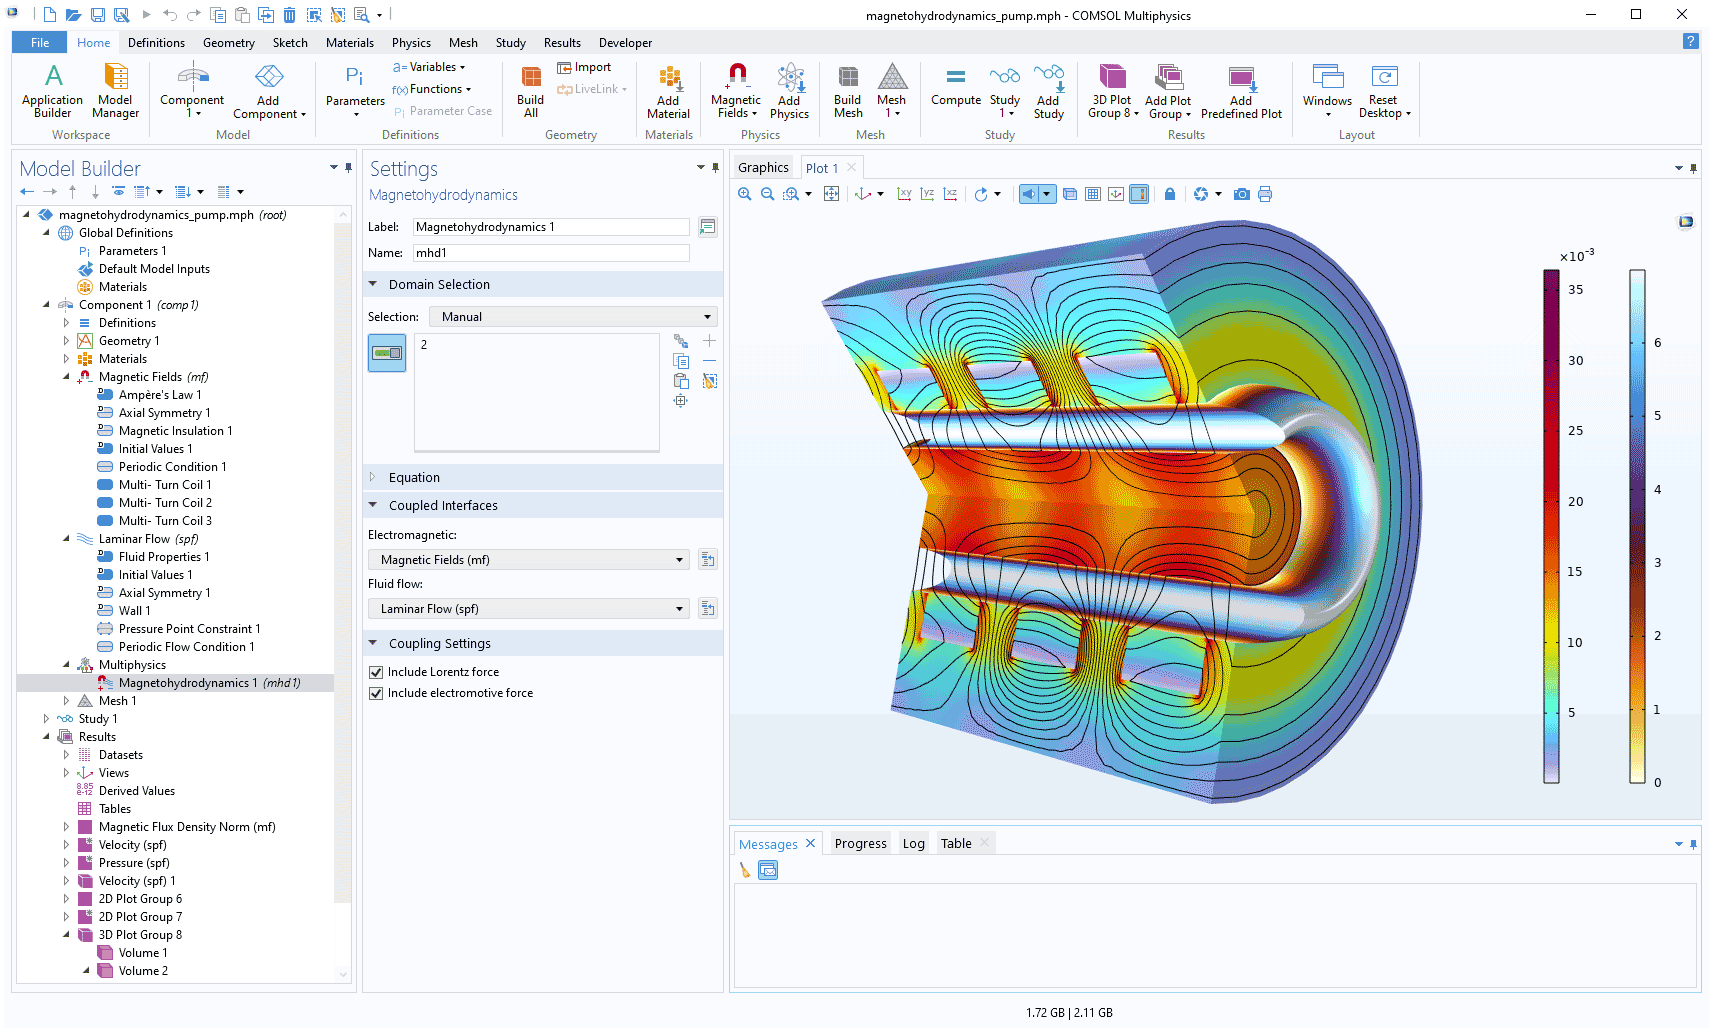 The COMSOL Multiphysics UI showing the Model Builder with the Magnetohydrodynamics node highlighted, the corresponding Settings window, and a pump model in the Graphics window.